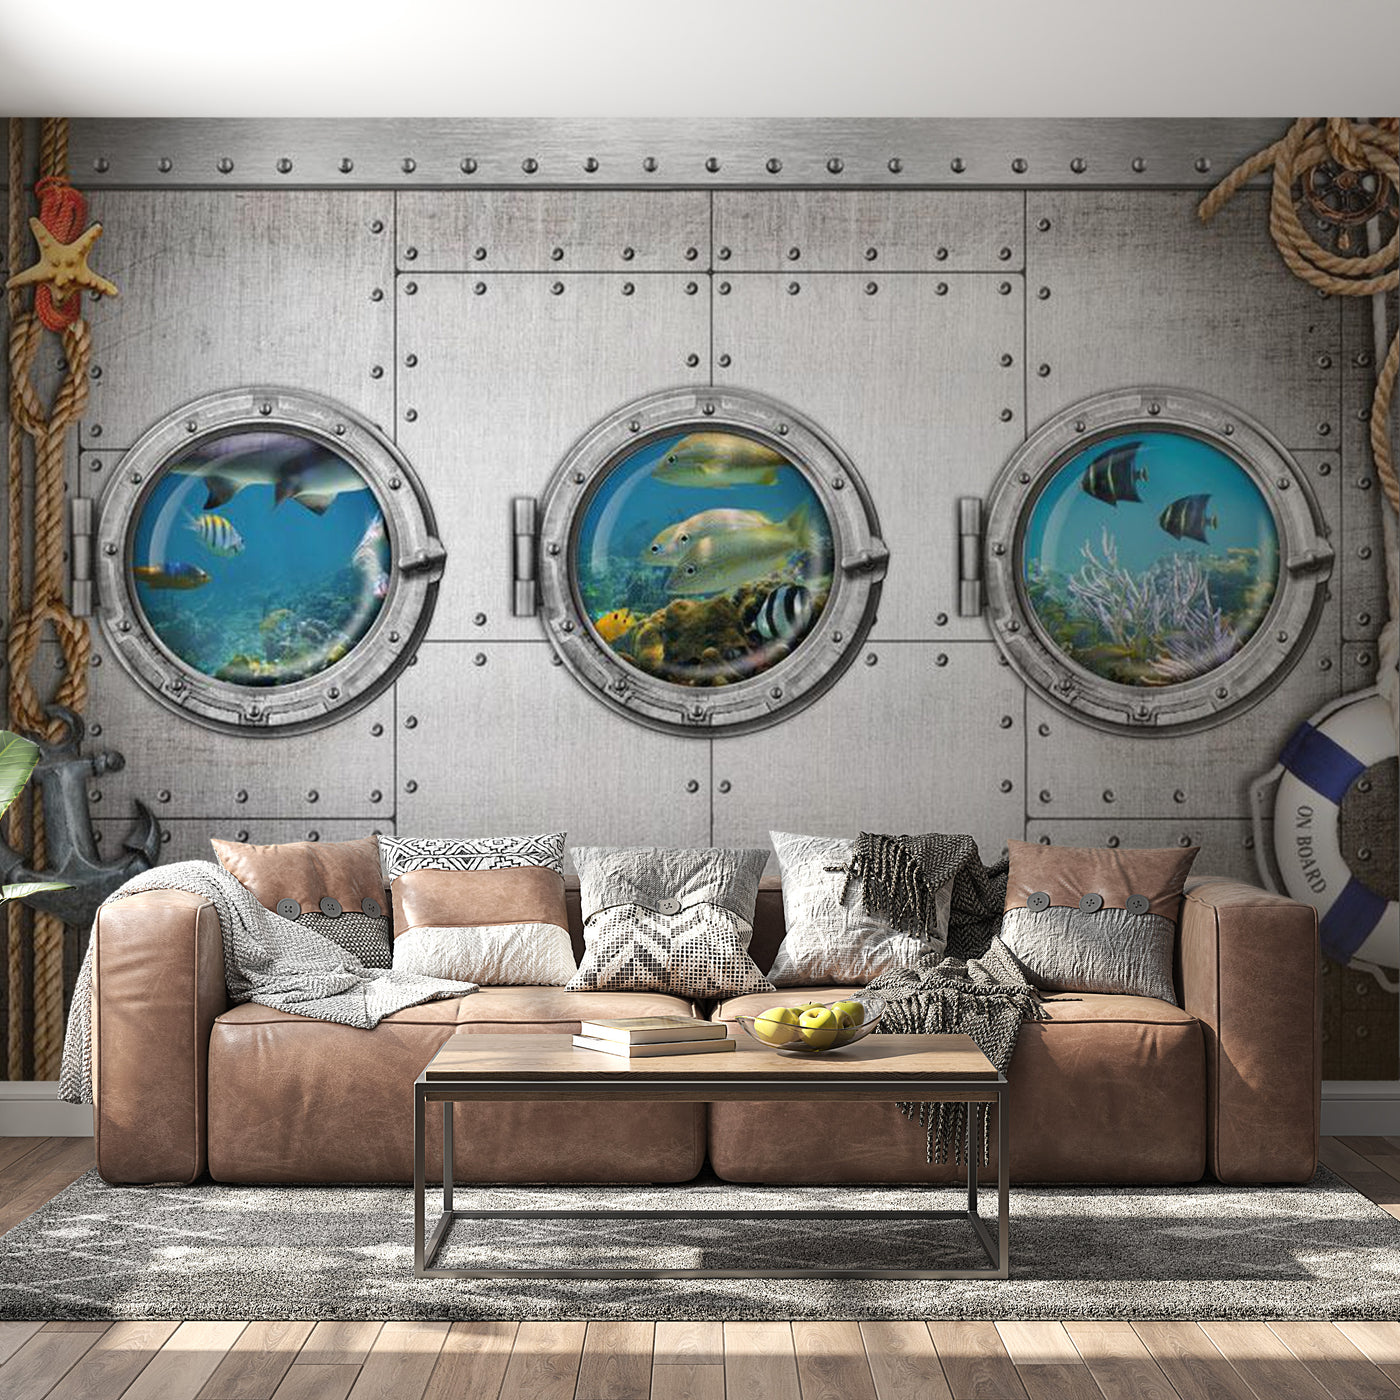 Peel & Stick Animal Wall Mural - Portholes - Removable Wall Decals